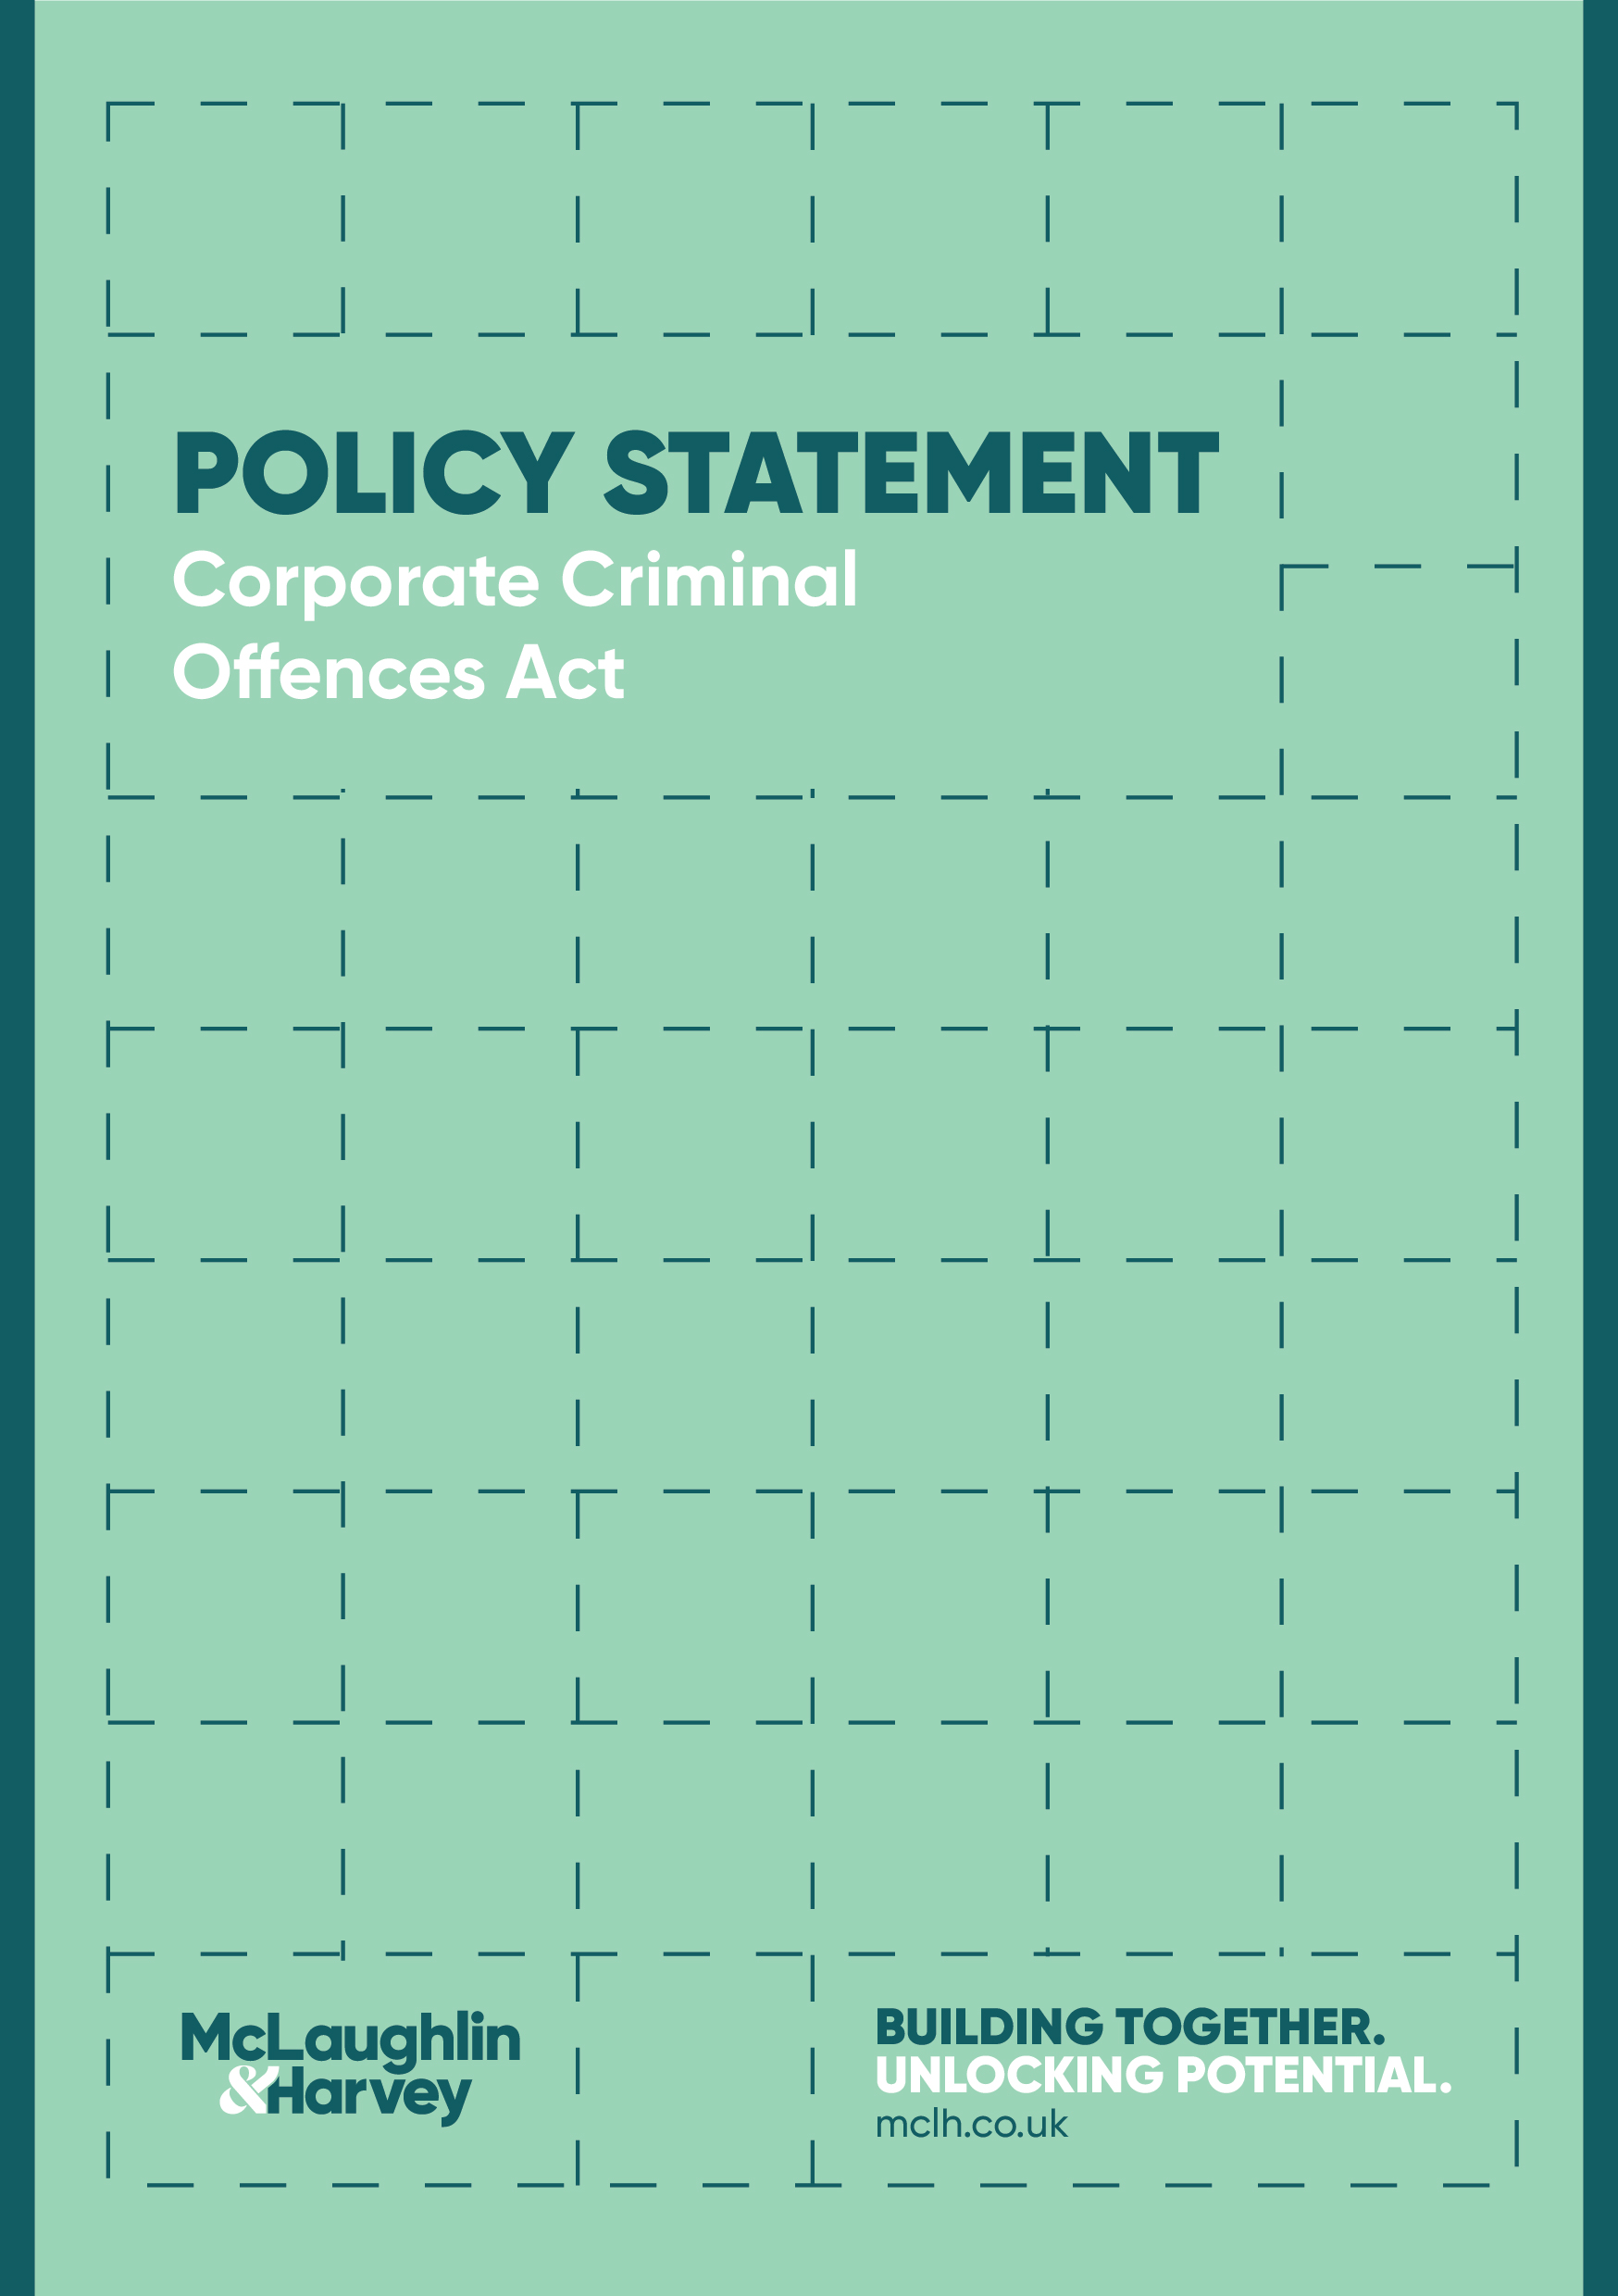 Featured Image for Corporate Criminal Offences Act Policy Statement